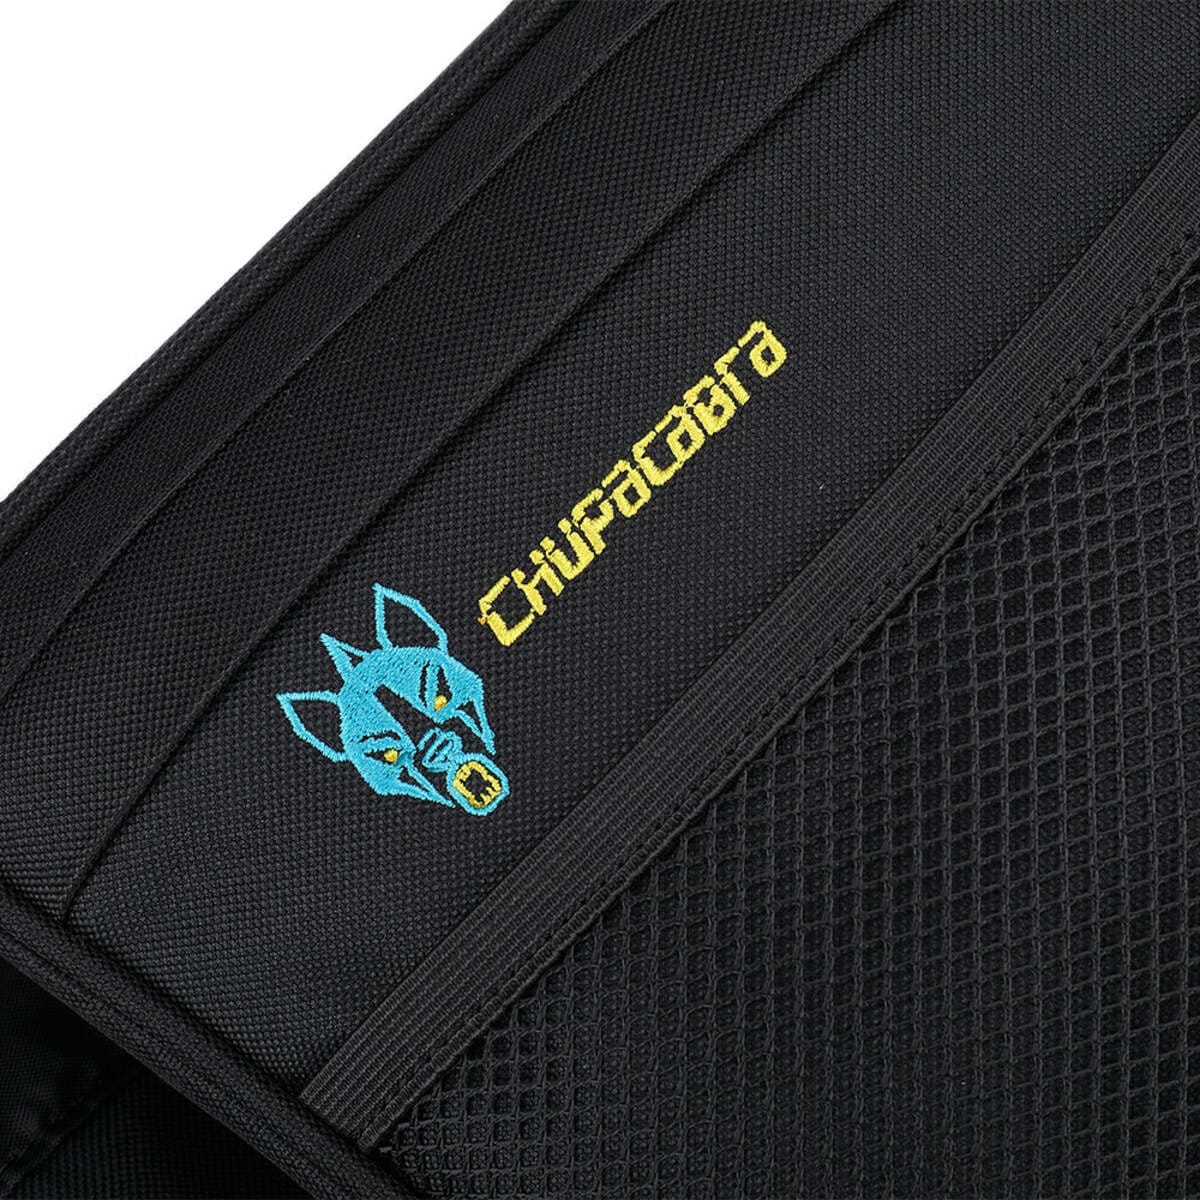 Chupacabra Offroad Can-Am Maverick X3 Rear Door Bags Set of Two Right & Left